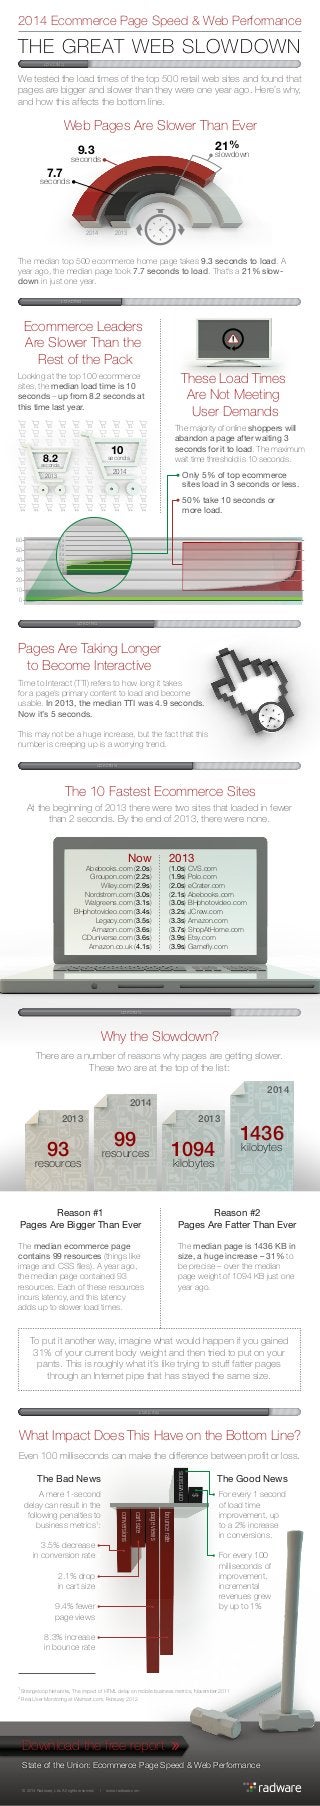 2014 Ecommerce Page Speed & Web Performance

THE GREAT WEB SLOWDOWN
LOADING

We tested the load times of the top 500 retail web sites and found that
pages are bigger and slower than they were one year ago. Here’s why,
and how this affects the bottom line.

Web Pages Are Slower Than Ever
21%

9.3

slowdown

seconds

7.7

seconds

2014

2013

The median top 500 ecommerce home page takes 9.3 seconds to load. A
year ago, the median page took 7.7 seconds to load. That’s a 21% slowdown in just one year.
LOADING

Ecommerce Leaders
Are Slower Than the
Rest of the Pack
These Load Times
Are Not Meeting
User Demands

Looking at the top 100 ecommerce
sites, the median load time is 10
seconds – up from 8.2 seconds at
this time last year.

The majority of online shoppers will
abandon a page after waiting 3
seconds for it to load. The maximum
wait time threshold is 10 seconds.

10

8.2

seconds

seconds

2014

2013

Only 5% of top ecommerce
sites load in 3 seconds or less.
50% take 10 seconds or
more load.

60
50
40
30

9s
8s
7s
6s
5s
4s
3s
2s
1s

20
10
0

LOADING

Pages Are Taking Longer
to Become Interactive
Time to Interact (TTI) refers to how long it takes
for a page’s primary content to load and become
usable. In 2013, the median TTI was 4.9 seconds.
Now it’s 5 seconds.
This may not be a huge increase, but the fact that this
number is creeping up is a worrying trend.
LOADING

The 10 Fastest Ecommerce Sites
At the beginning of 2013 there were two sites that loaded in fewer
than 2 seconds. By the end of 2013, there were none.

Now

2013

Abebooks.com (2.0s)
Groupon.com (2.2s)
Wiley.com (2.9s)
Nordstrom.com (3.0s)
Walgreens.com (3.1s)
BHphotovideo.com (3.4s)
Legacy.com (3.5s)
Amazon.com (3.6s)
CDuniverse.com (3.6s)
Amazon.co.uk (4.1s)

(1.0s) CVS.com
(1.9s) Polo.com
(2.0s) eCrater.com
(2.1s) Abebooks.com
(3.0s) BHphotovideo.com
(3.2s) JCrew.com
(3.3s) Amazon.com
(3.7s) ShopAtHome.com
(3.9s) Etsy.com
(3.9s) Gamefly.com

LOADING

Why the Slowdown?
There are a number of reasons why pages are getting slower.
These two are at the top of the list:
2014
2014
2013

2013

99

93

1094

resources

resources

1436
kilobytes

kilobytes

Reason #1
Pages Are Bigger Than Ever

Reason #2
Pages Are Fatter Than Ever

The median ecommerce page
contains 99 resources (things like
image and CSS files). A year ago,
the median page contained 93
resources. Each of these resources
incurs latency, and this latency
adds up to slower load times.

The median page is 1436 KB in
size, a huge increase – 31% to
be precise – over the median
page weight of 1094 KB just one
year ago.

To put it another way, imagine what would happen if you gained
31% of your current body weight and then tried to put on your
pants. This is roughly what it’s like trying to stuff fatter pages
through an Internet pipe that has stayed the same size.

LOADING

What Impact Does This Have on the Bottom Line?
conversions

Even 100 milliseconds can make the difference between profit or loss.
The Bad News

$

For every 1 second
of load time
improvement, up
to a 2% increase
in conversions.
For every 100
milliseconds of
improvement,
incremental
revenues grew
by up to 1%

bounce rate

page views

•

•

cart size

3.5% decrease •
in conversion rate •

conversions

A mere 1-second
delay can result in the
following penalties to
business metrics1:

The Good News

2.1% drop •
in cart size •
9.4% fewer •
page views •
8.3% increase •
in bounce rate •

1

Strangeloop Networks, The impact of HTML delay on mobile business metrics, November 2011

2

Real User Monitoring at Walmart.com, February 2012

Download the free report
State of the Union: Ecommerce Page Speed & Web Performance
© 2014 Radware, Ltd. All rights reserved.

|

www.radware.com

 